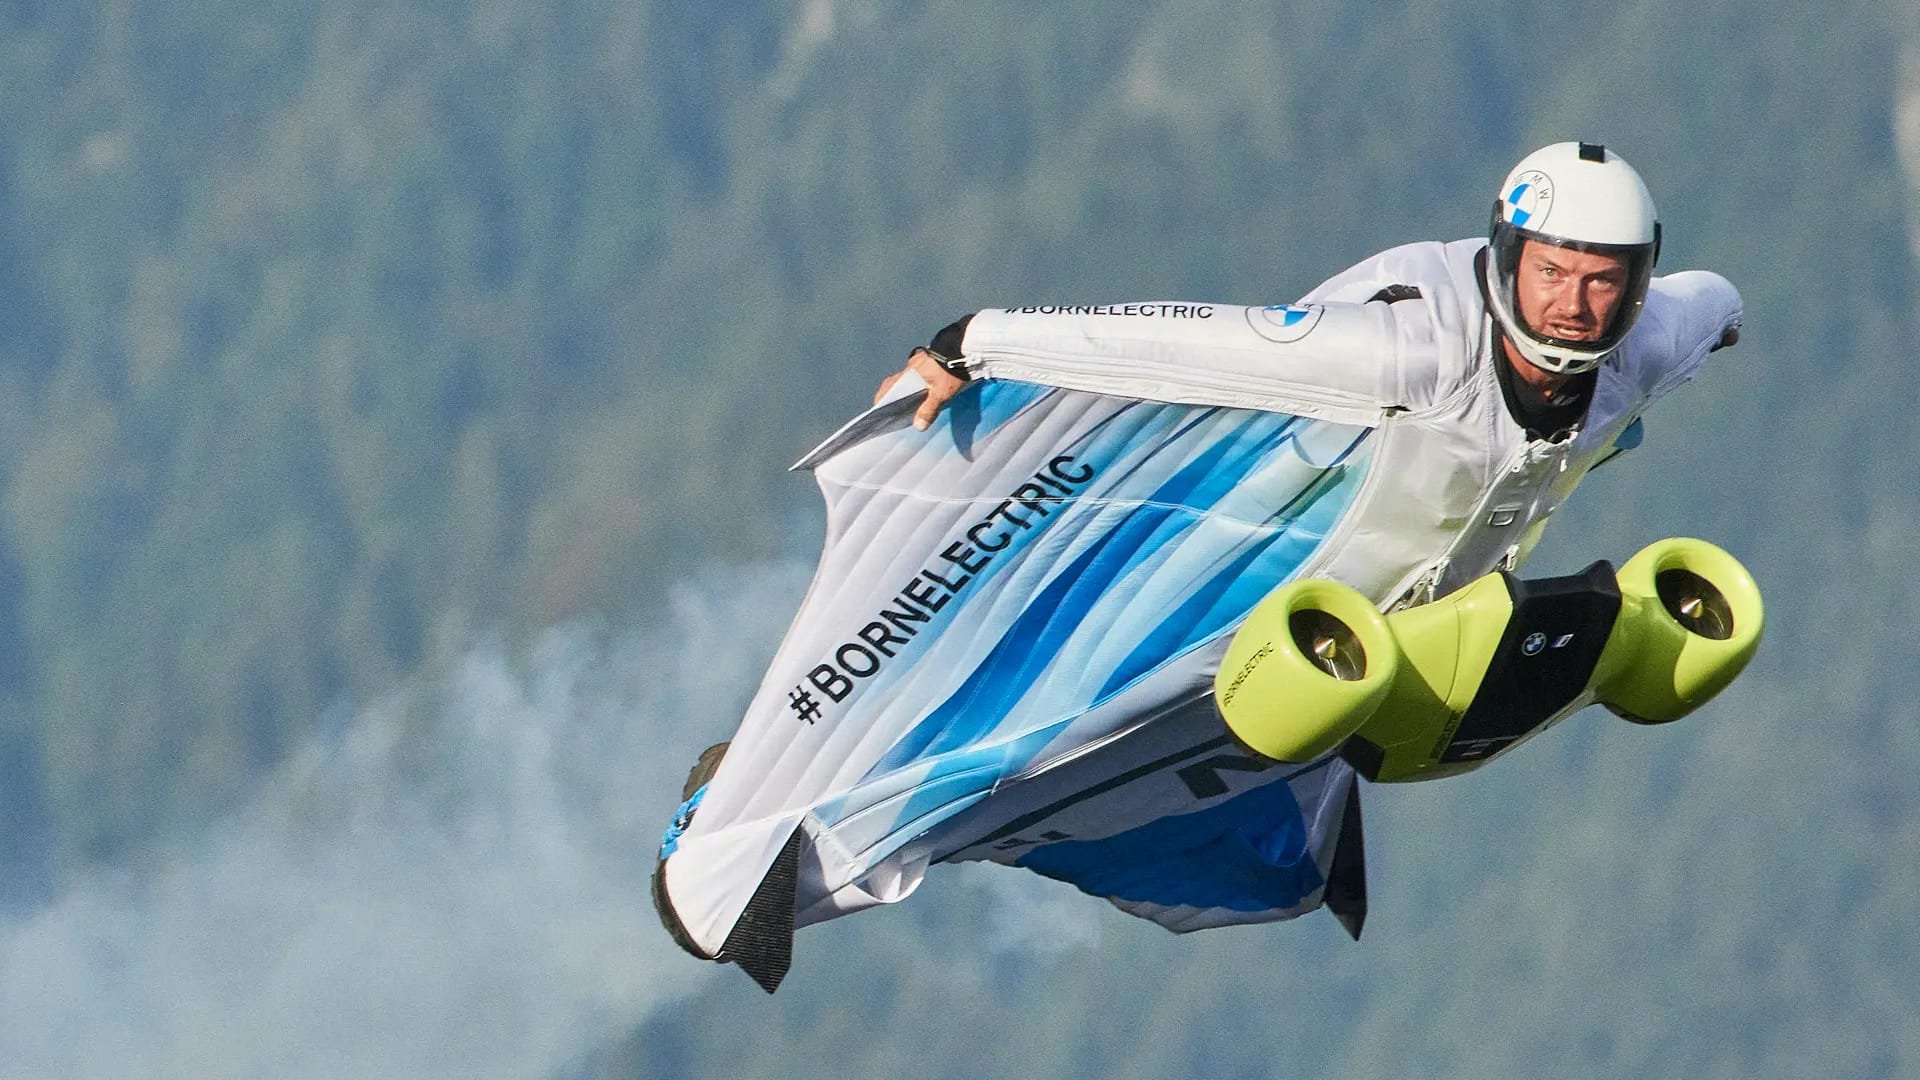 BMW Electrified Wingsuit lets you soar through the sky at 186 mph